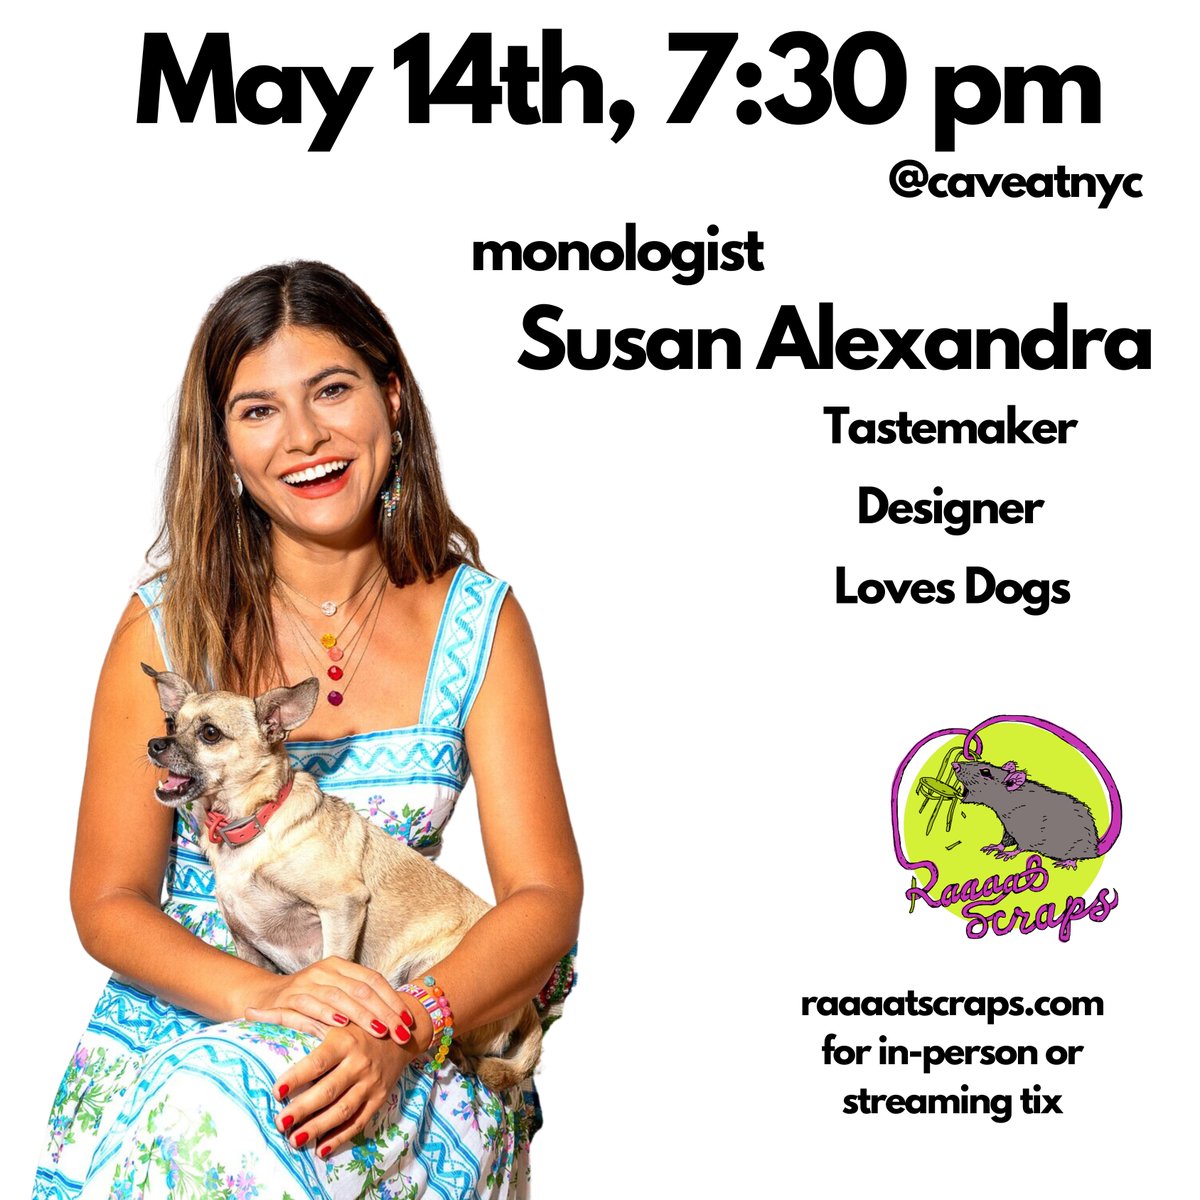 Very Cool Monologist Alert! Susan Alexandra!!!!!! The Coolest of the Cool wear her fun and joyful designs. And we tricked her into joining us in a basement somehow on Sunday. Tickets - In-Person or Streaming RaaaatScraps.com/shows